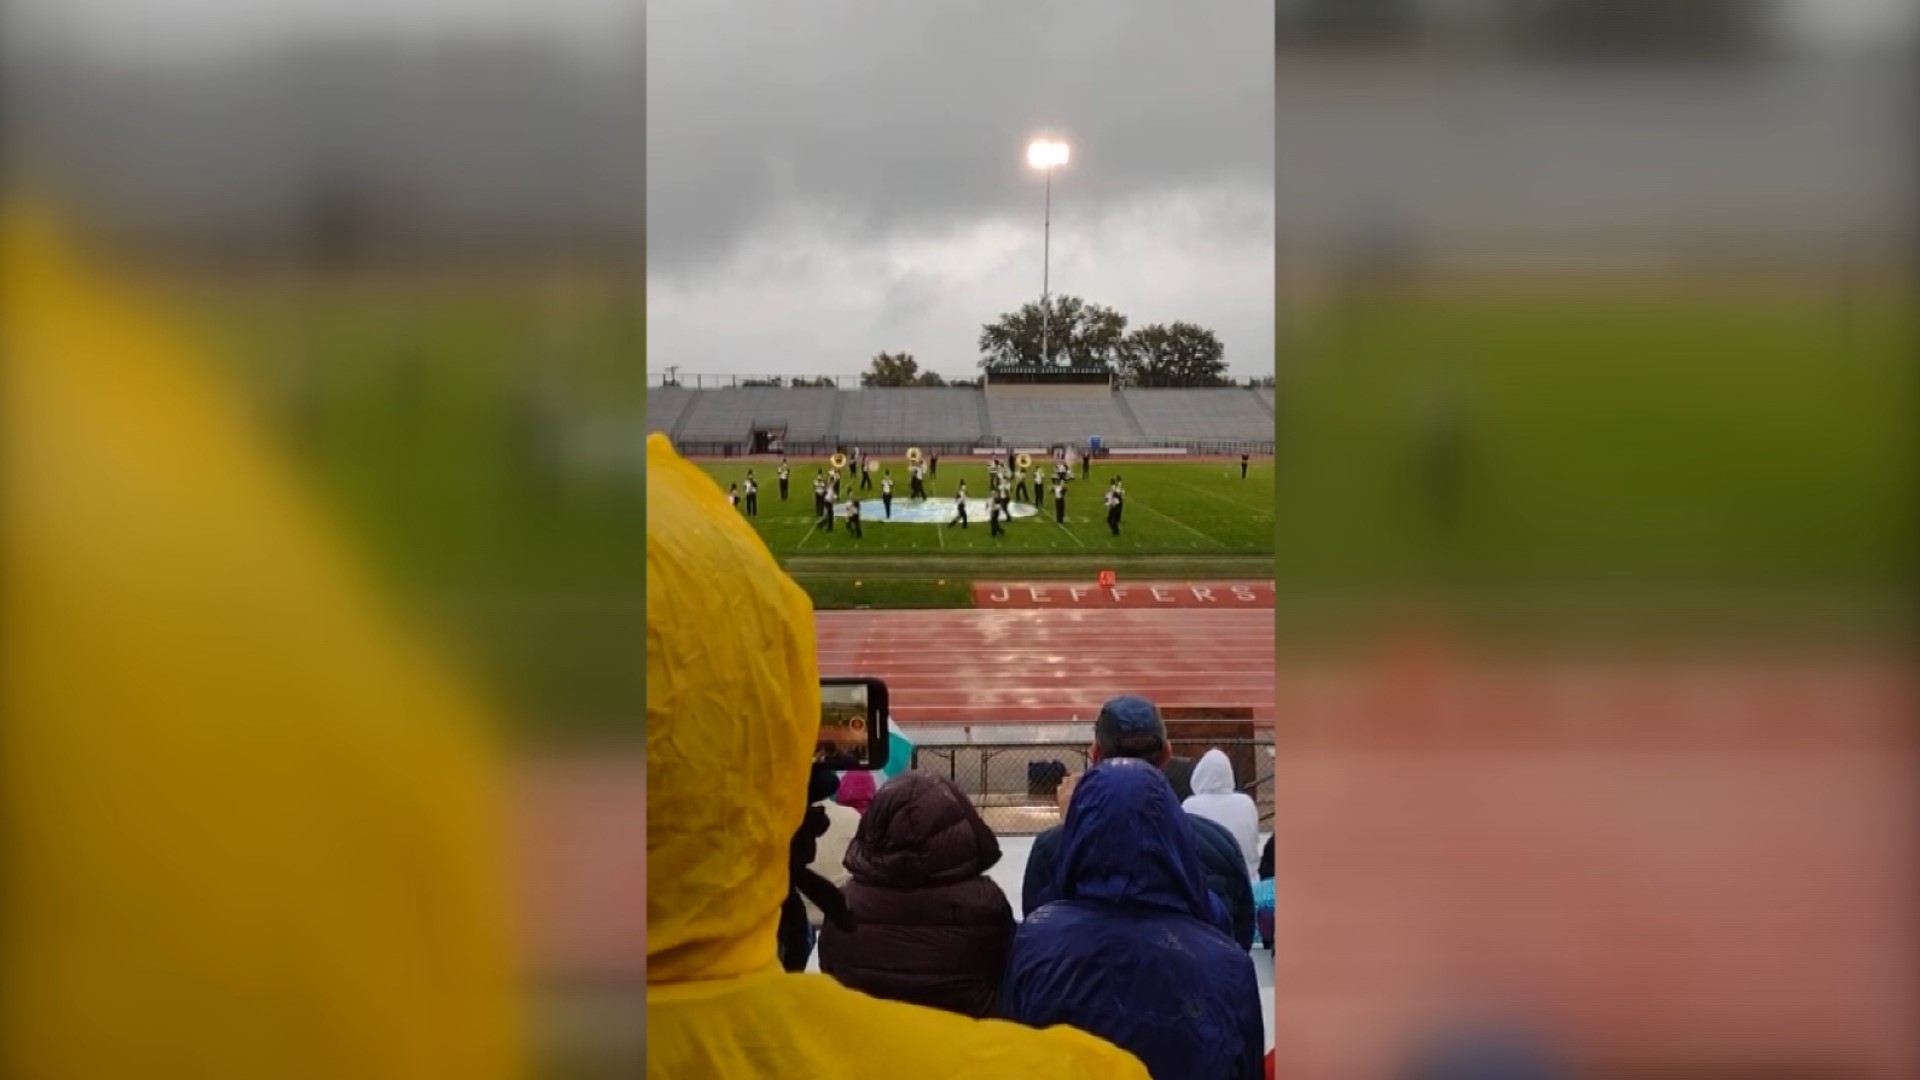 The Wheat Ridge High School marching band performs during the 2022 season.